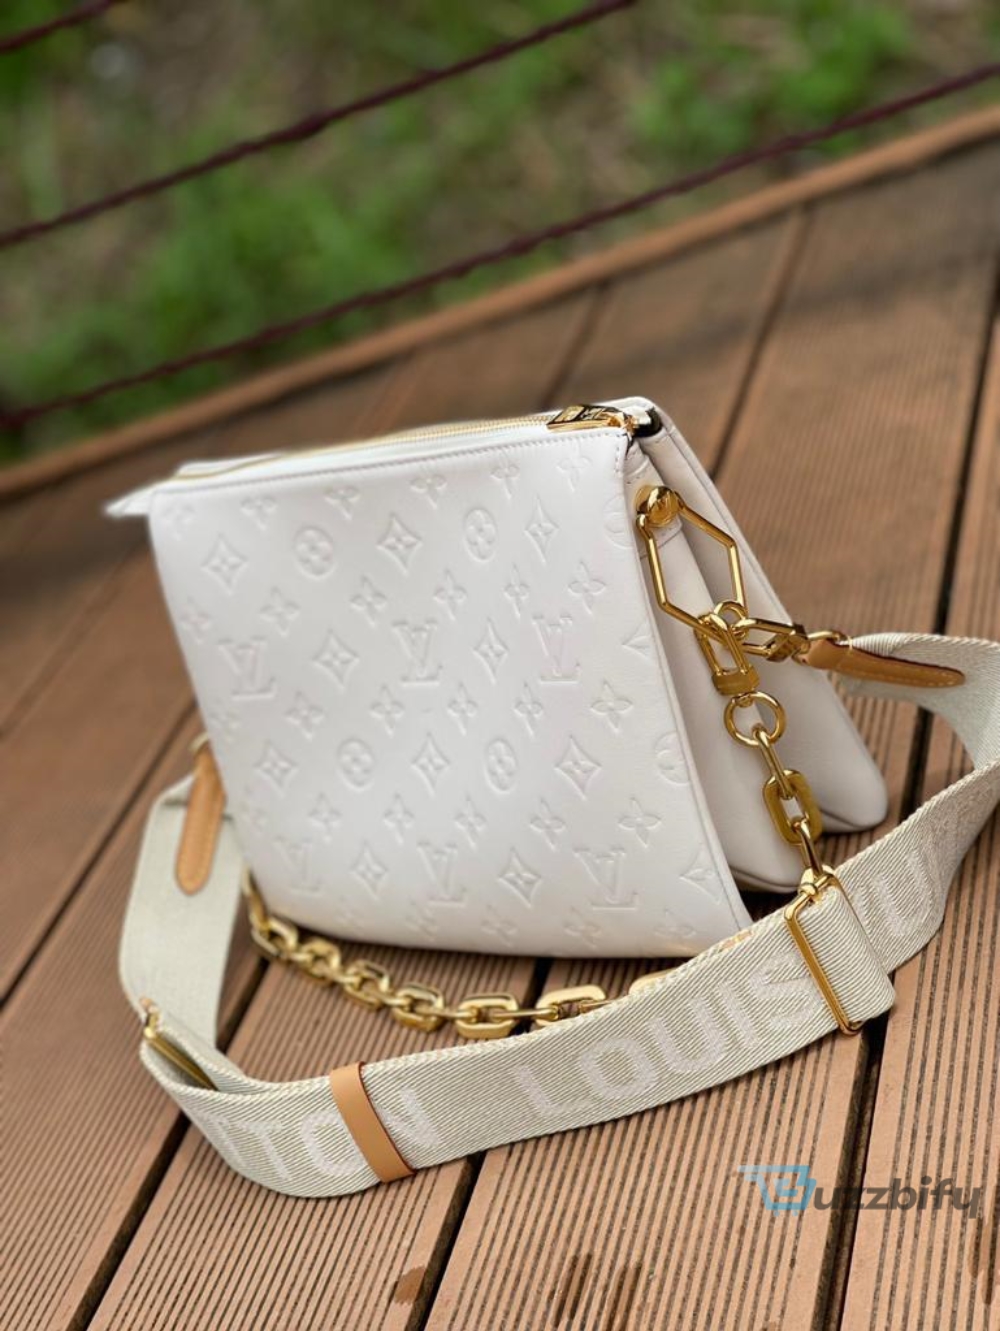 louis vuitton coussin pm monogram embossed puffy white for women womens handbags shoulder and crossbody bags 102in26cm lv m57793 2799 buzzbify 1 35